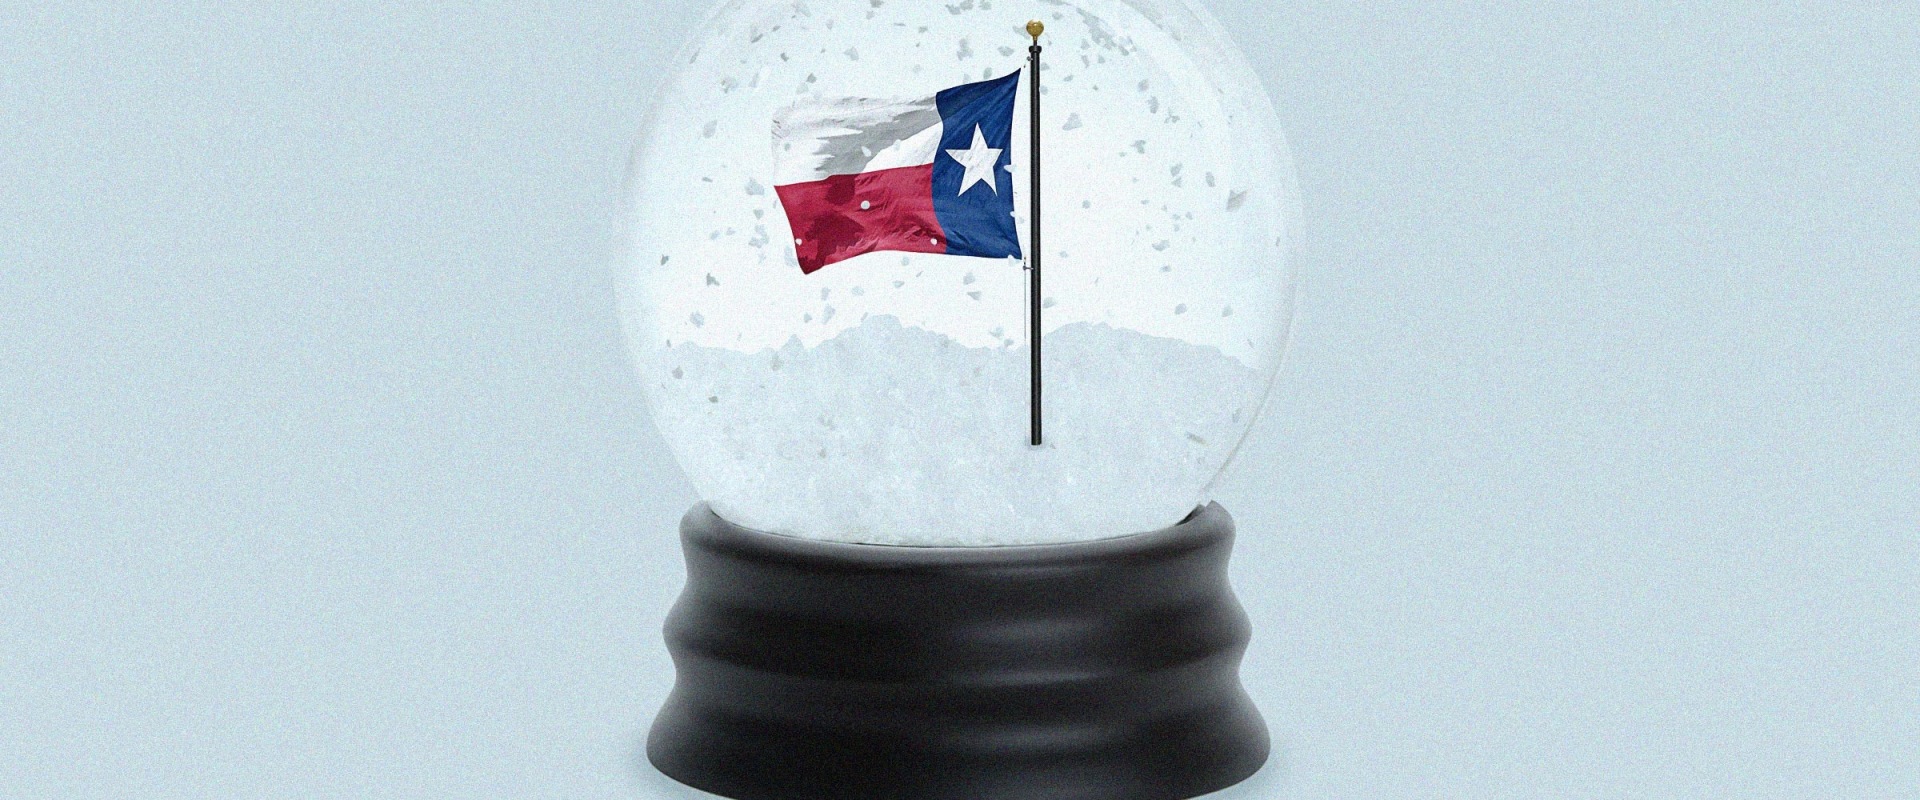 What Kind of Winter Will Texans Experience This Year?